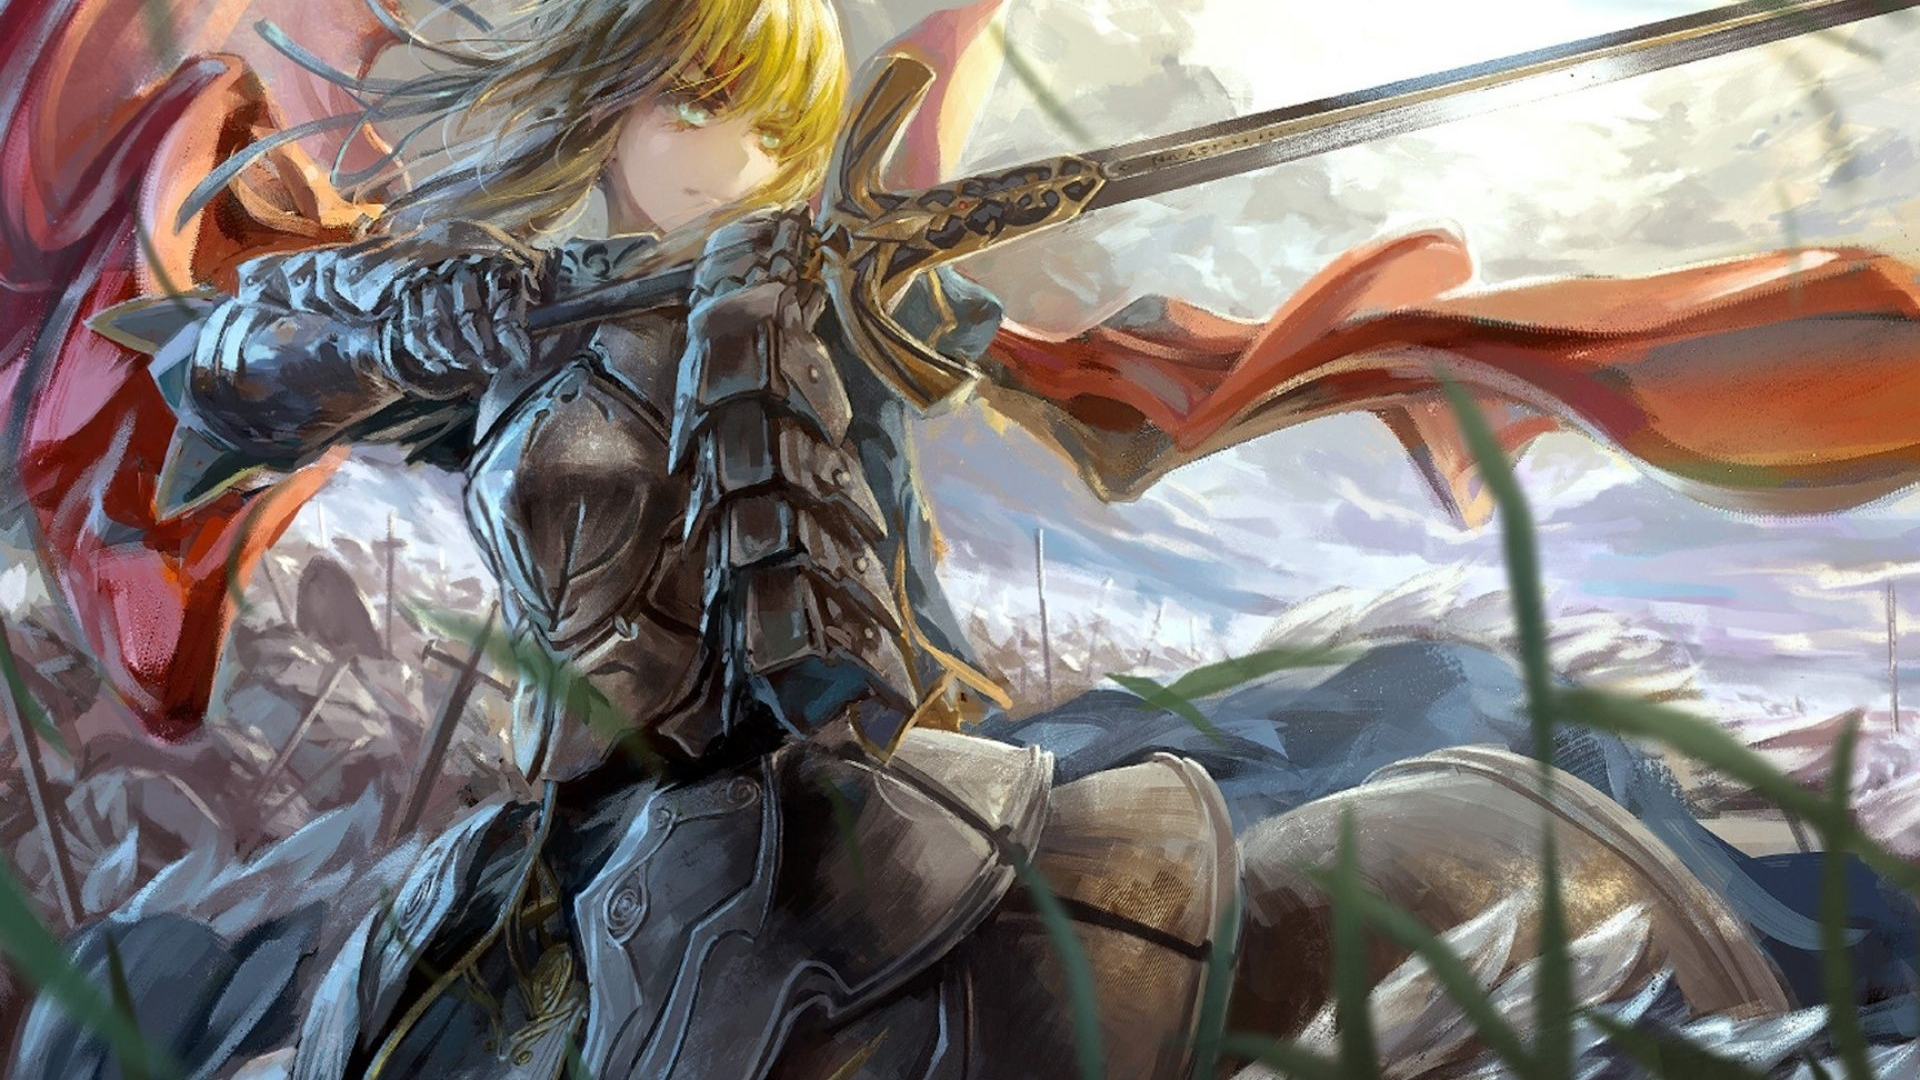 Download Fate Stay Night Saber Anime, Fate, Stay, Night, Saber, Anime  Wallpaper in 1920x1080 Resolution